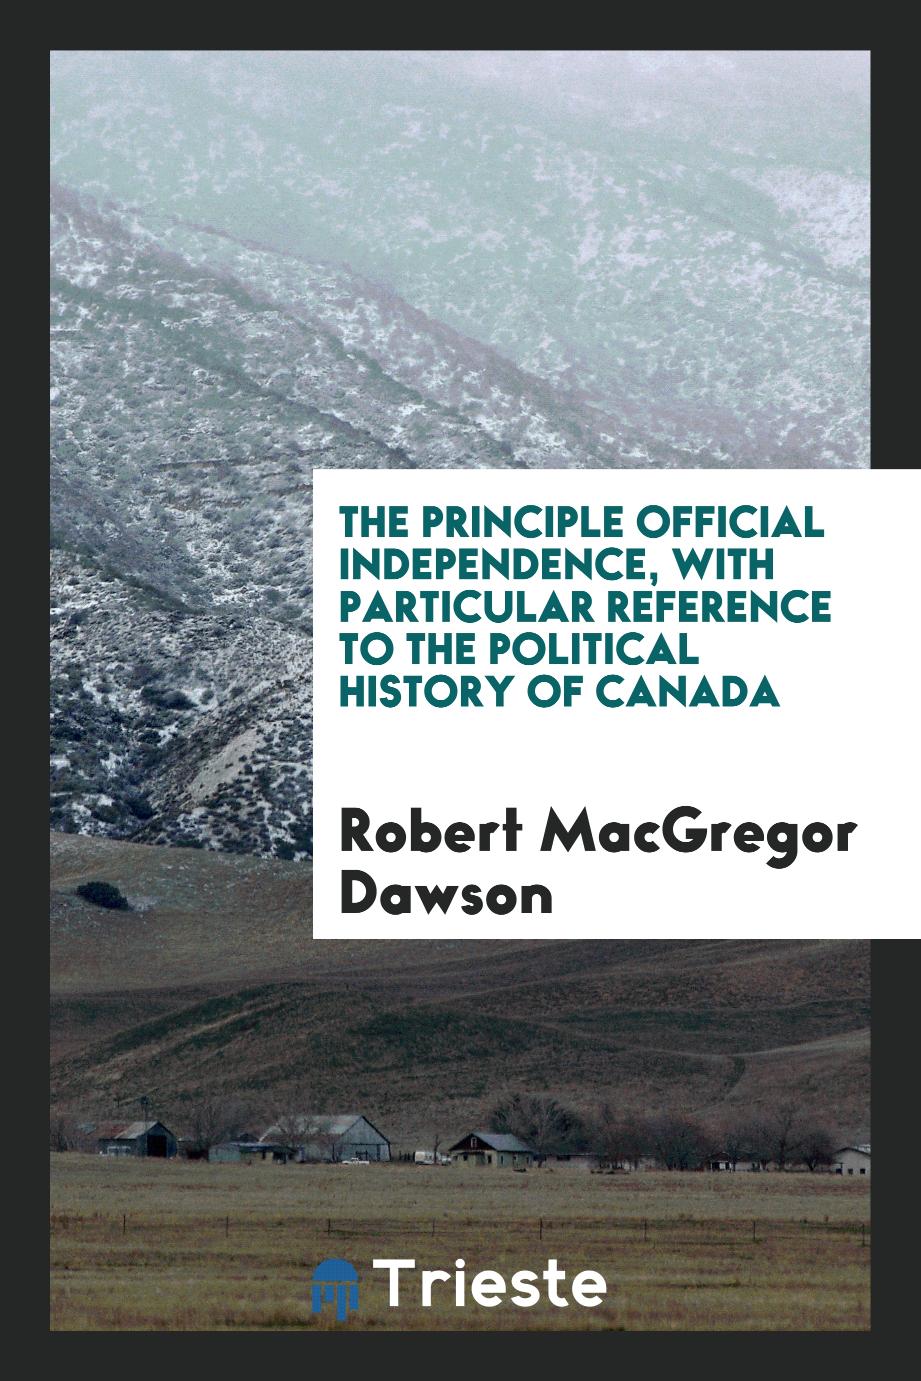 The principle official independence, with particular reference to the political history of Canada